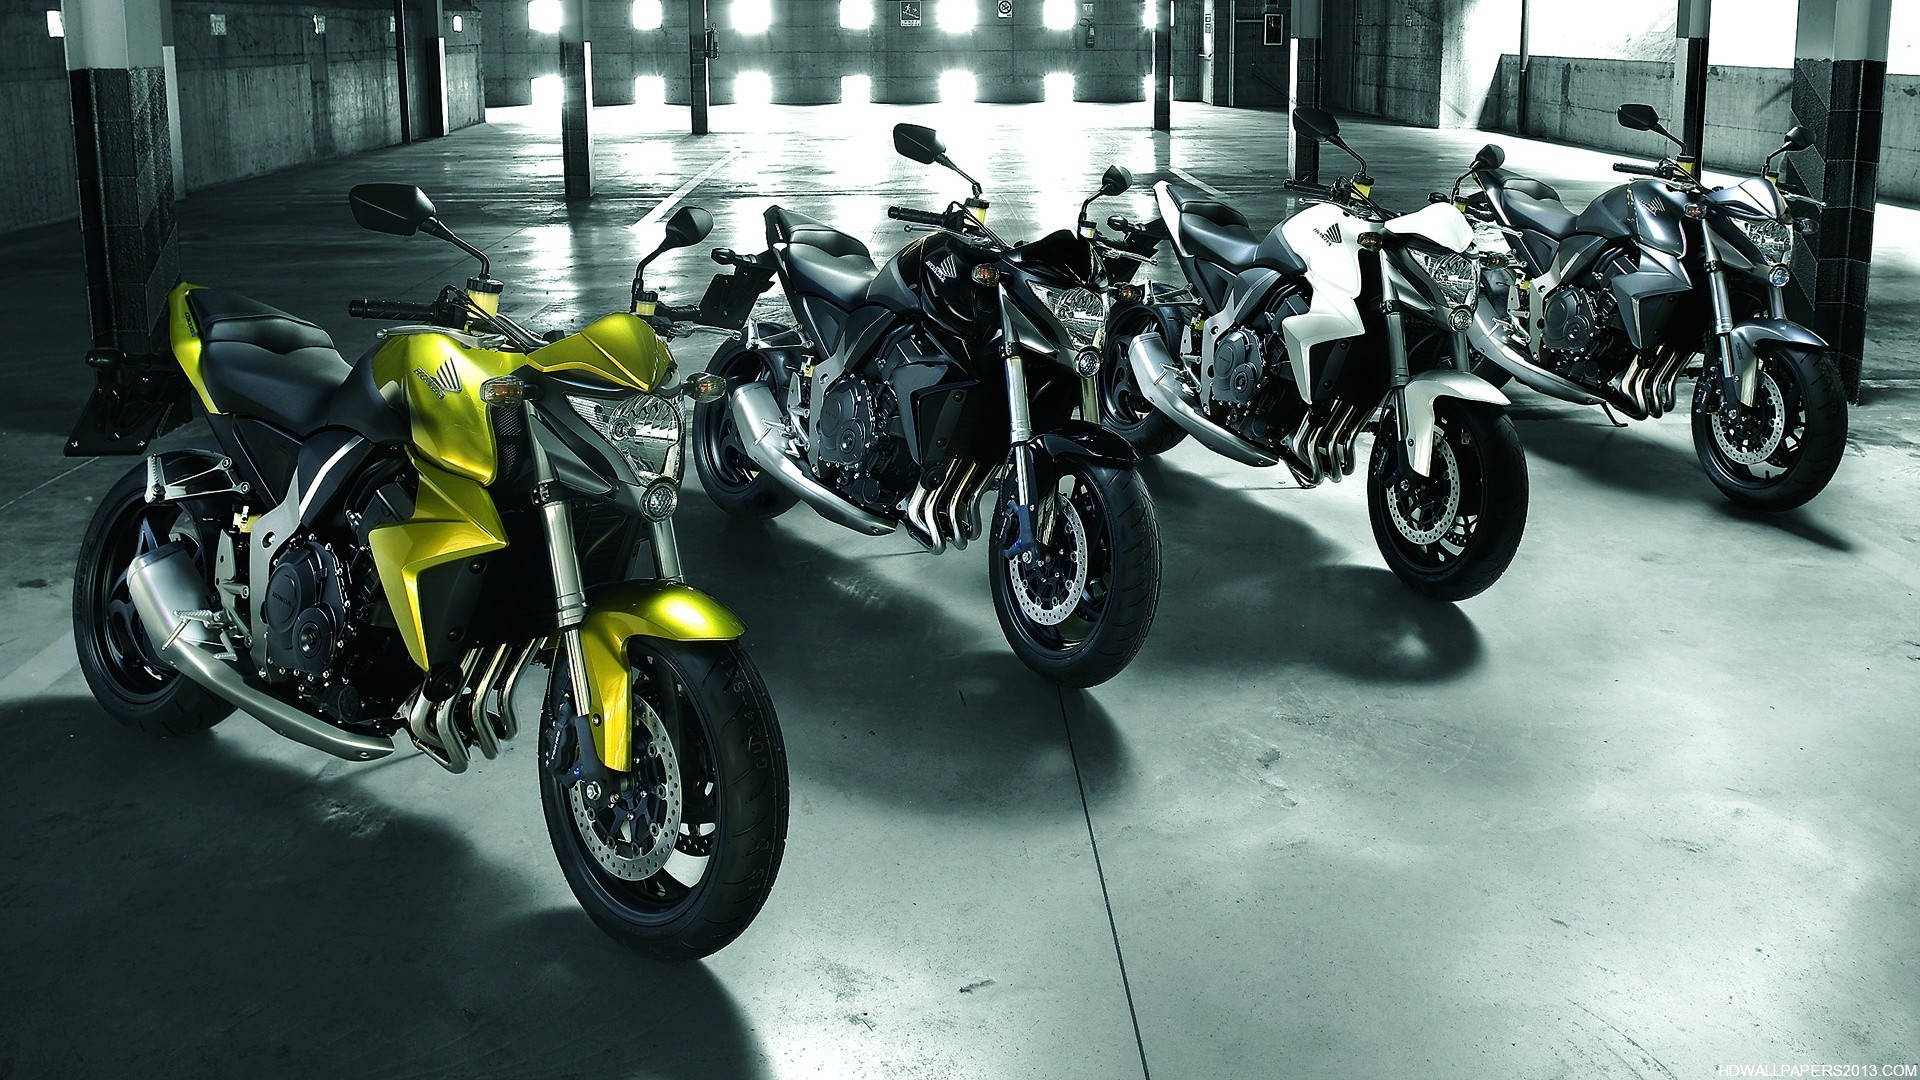 A Group Of Motorcycles Parked In A Garage Wallpaper